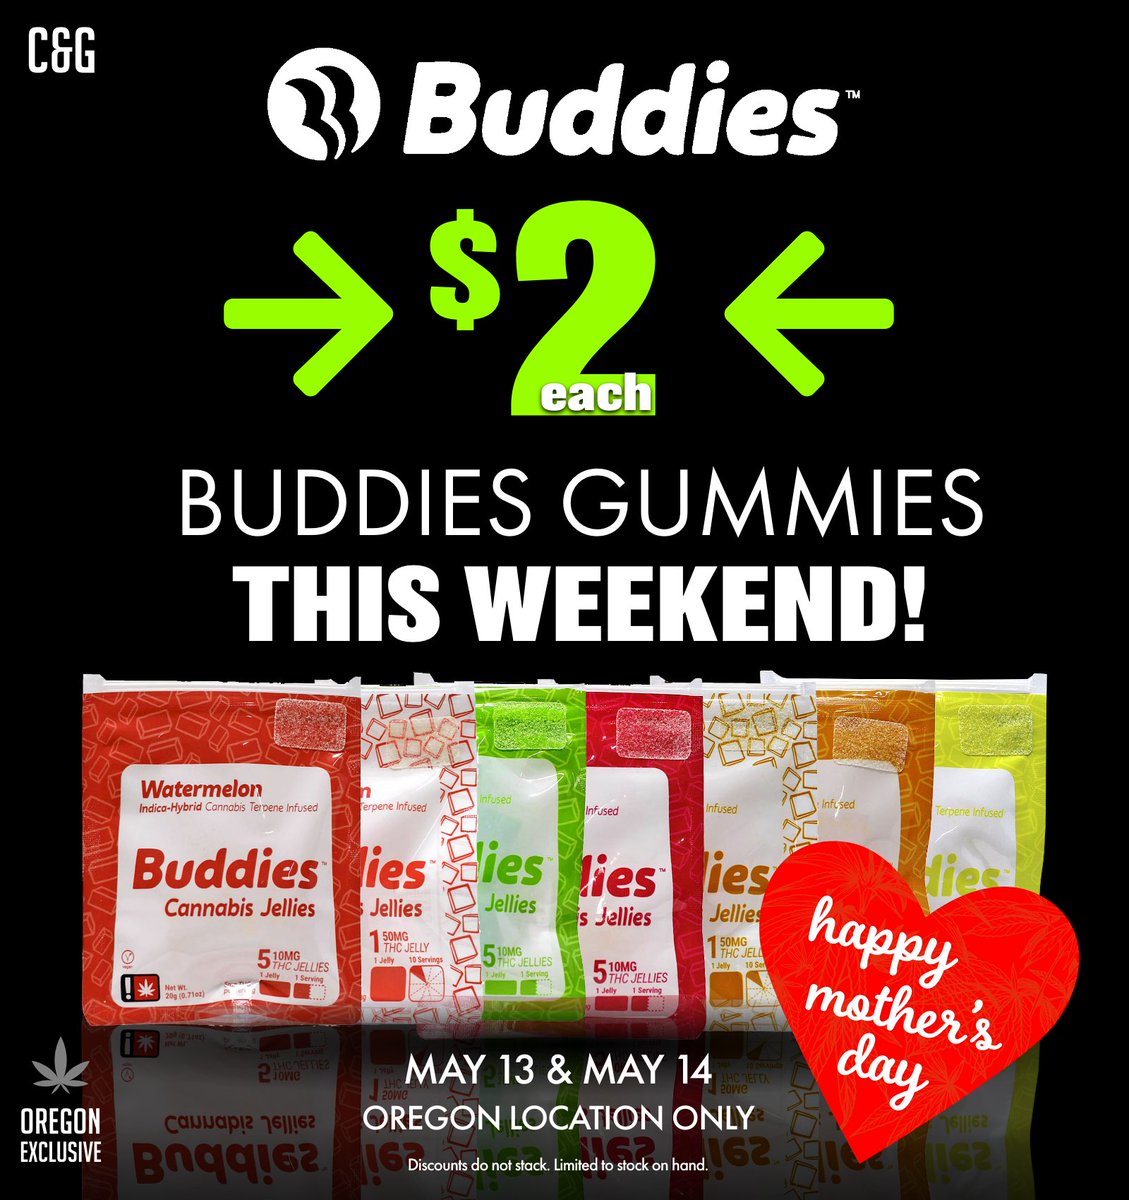 🌸OR LOCATION - Buddies Edibles for ONLY $2.00ea in Ontario this weekend!
cannabisandglassor.com
#cannabisontario  #ontariocannabis
#oregoncannabis